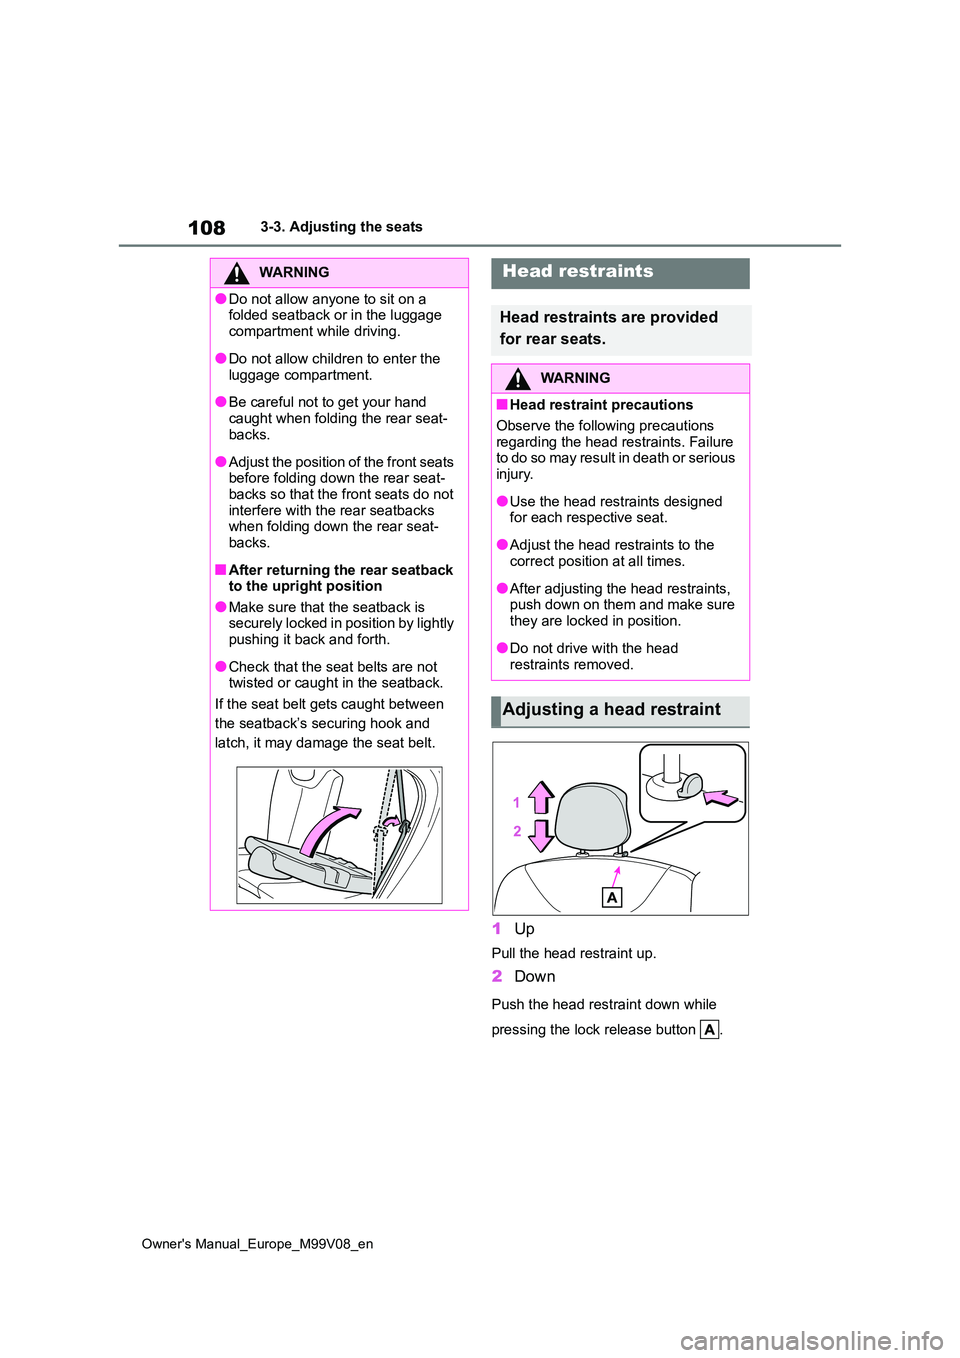 TOYOTA AYGO X 2022   (in English) Owners Guide 108
Owner's Manual_Europe_M99V08_en
3-3. Adjusting the seats
1Up
Pull the head restraint up.
2Down
Push the head restraint down while  
pressing the lock release button  .
WARNING
●Do not allow 